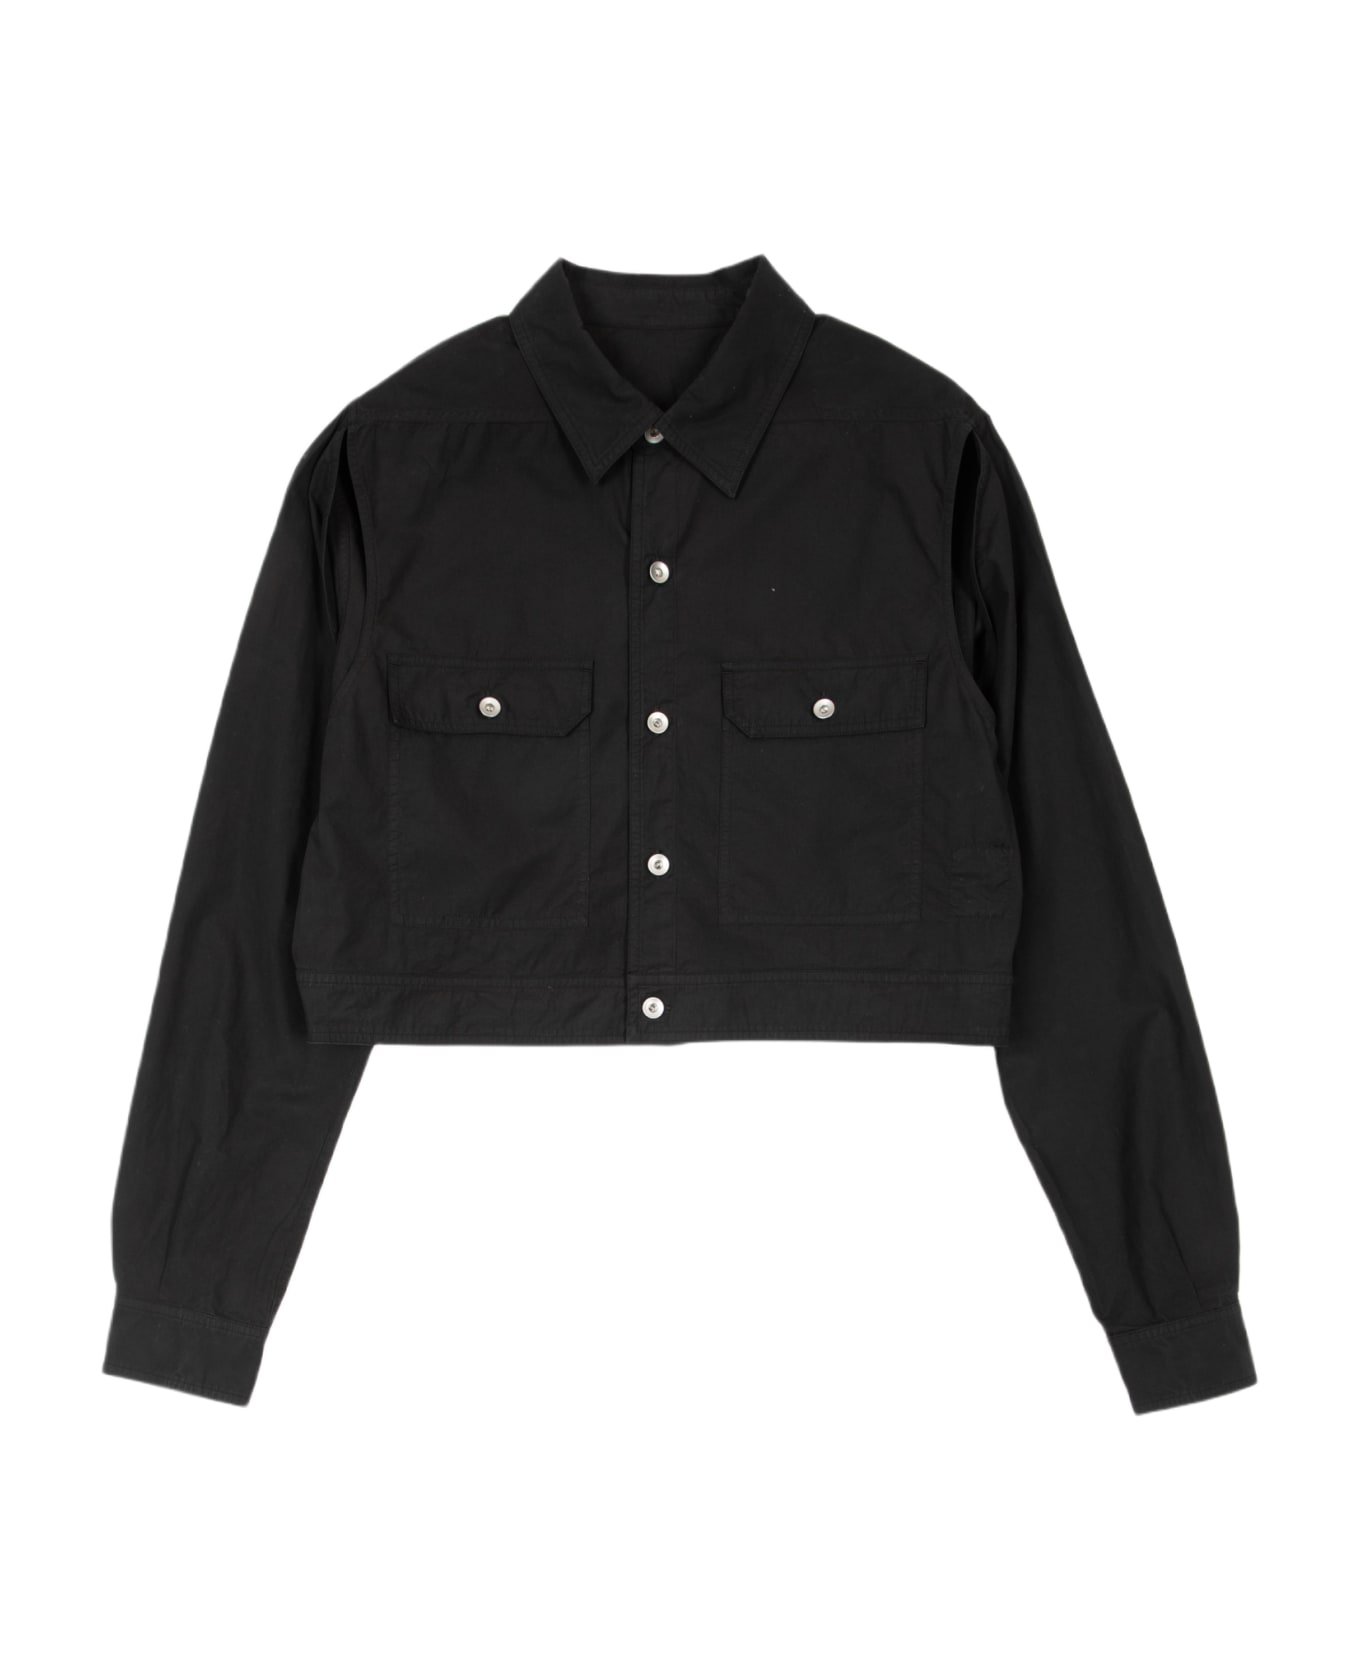 DRKSHDW Cape Sleeve Cropped Outershirt Black poplin cotton outershirt - Cape sleeve cropped outershirt - Nero